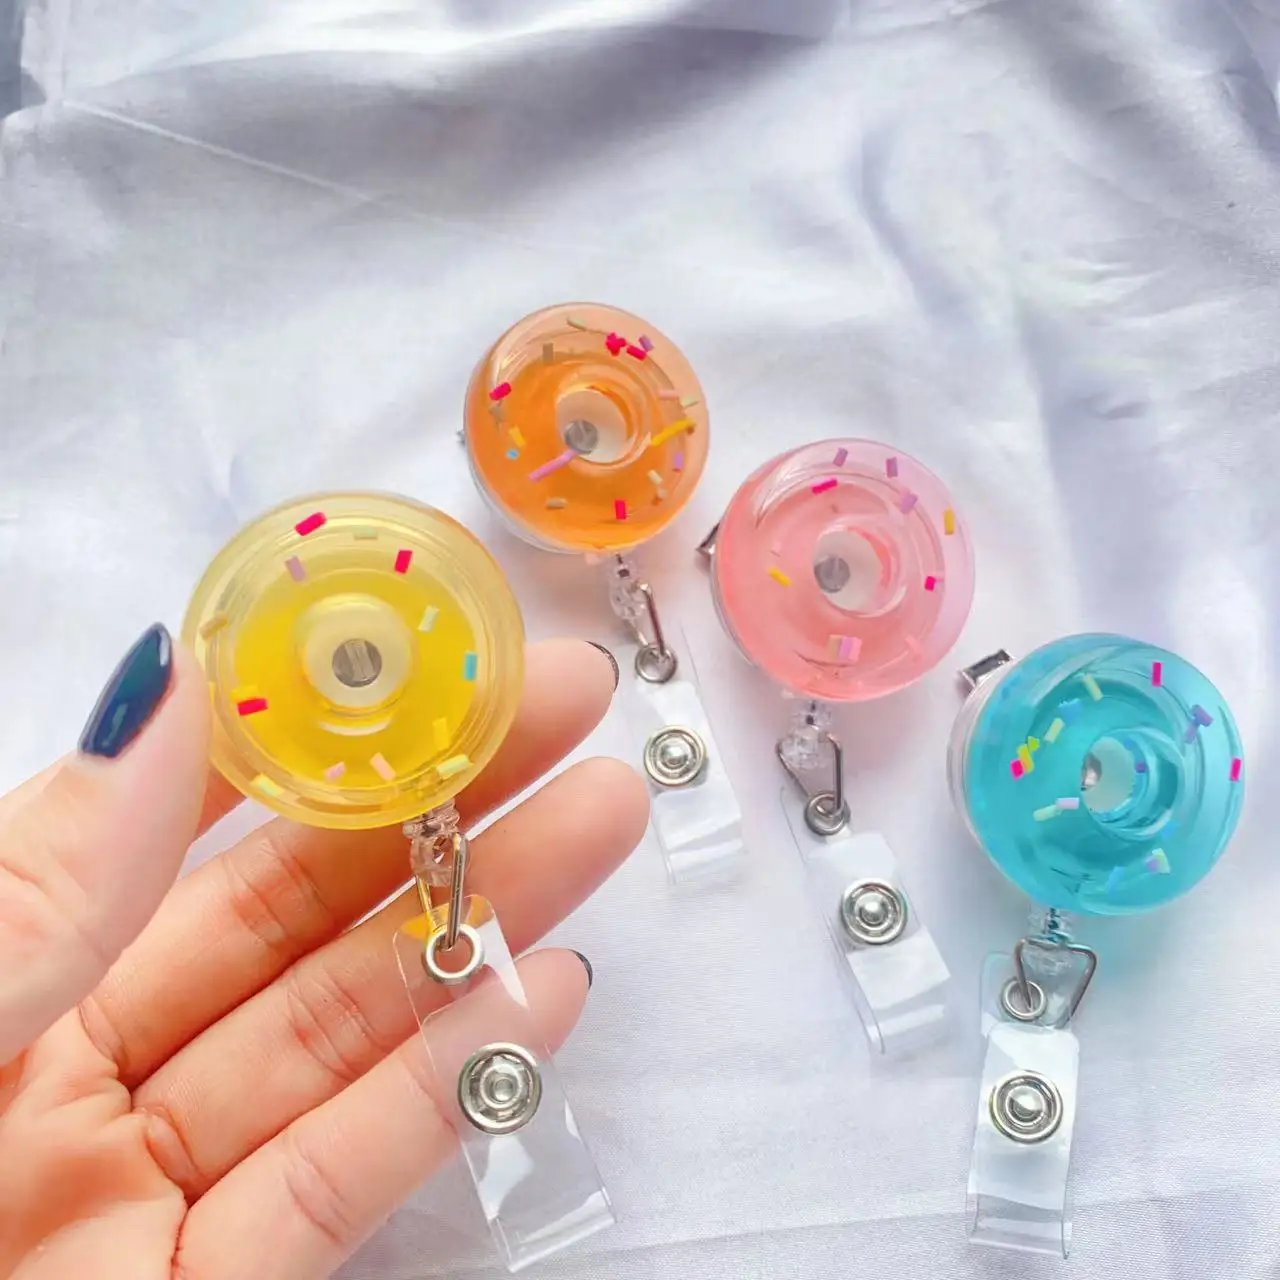 Kawaii 3D Donuts Candy Transparent Nurse Badge Reels Heavy Duty Retractable 360 Alligator Clip ID Holder For Student Doctor